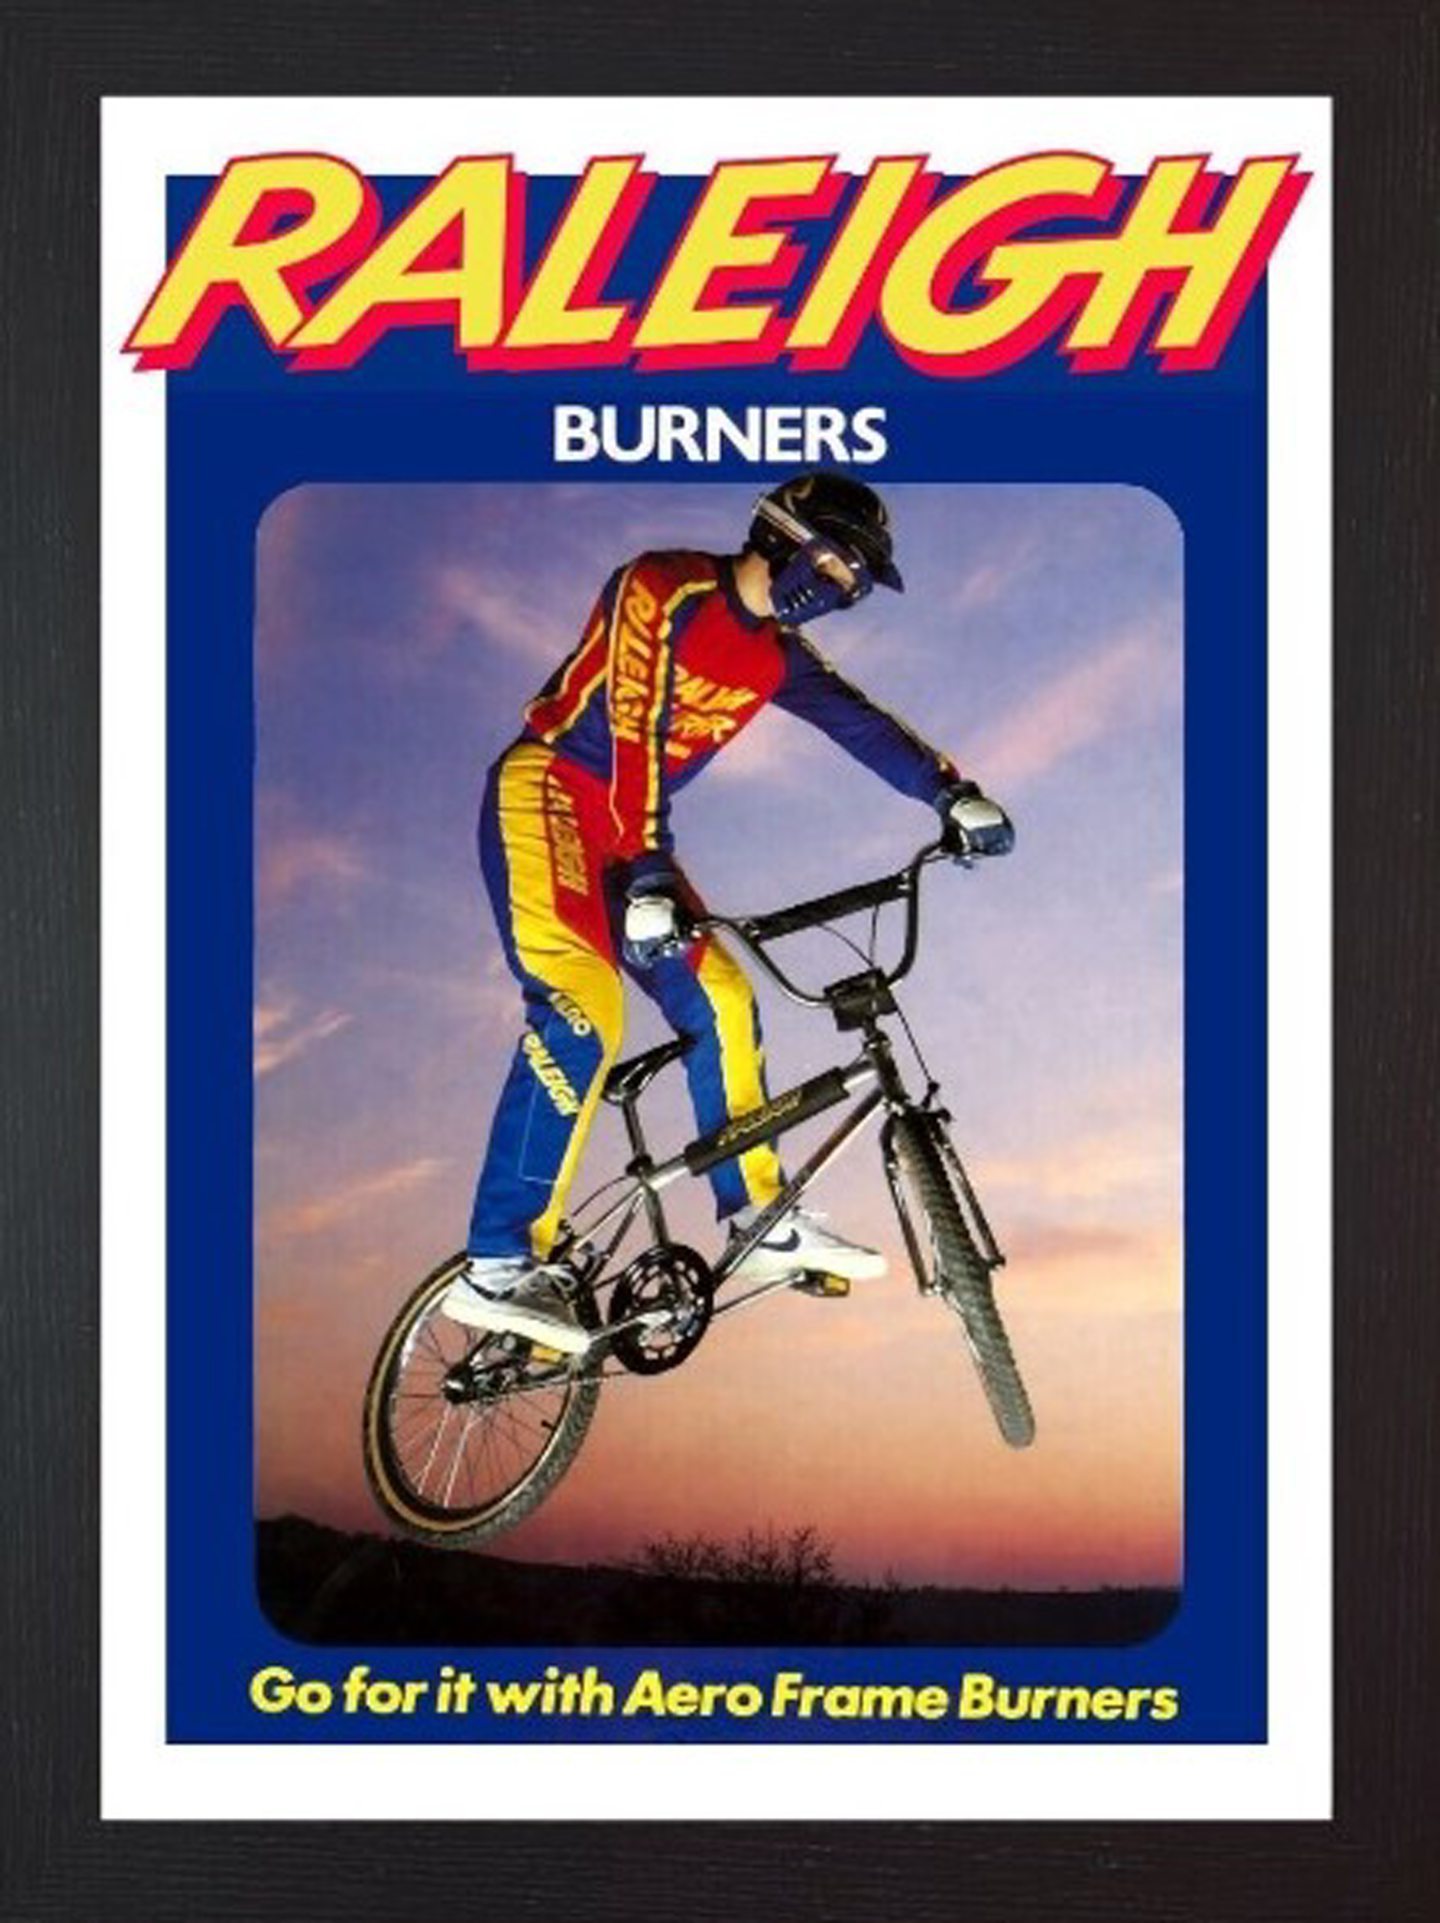 A man does a jump in an advert for Raleigh Burners 